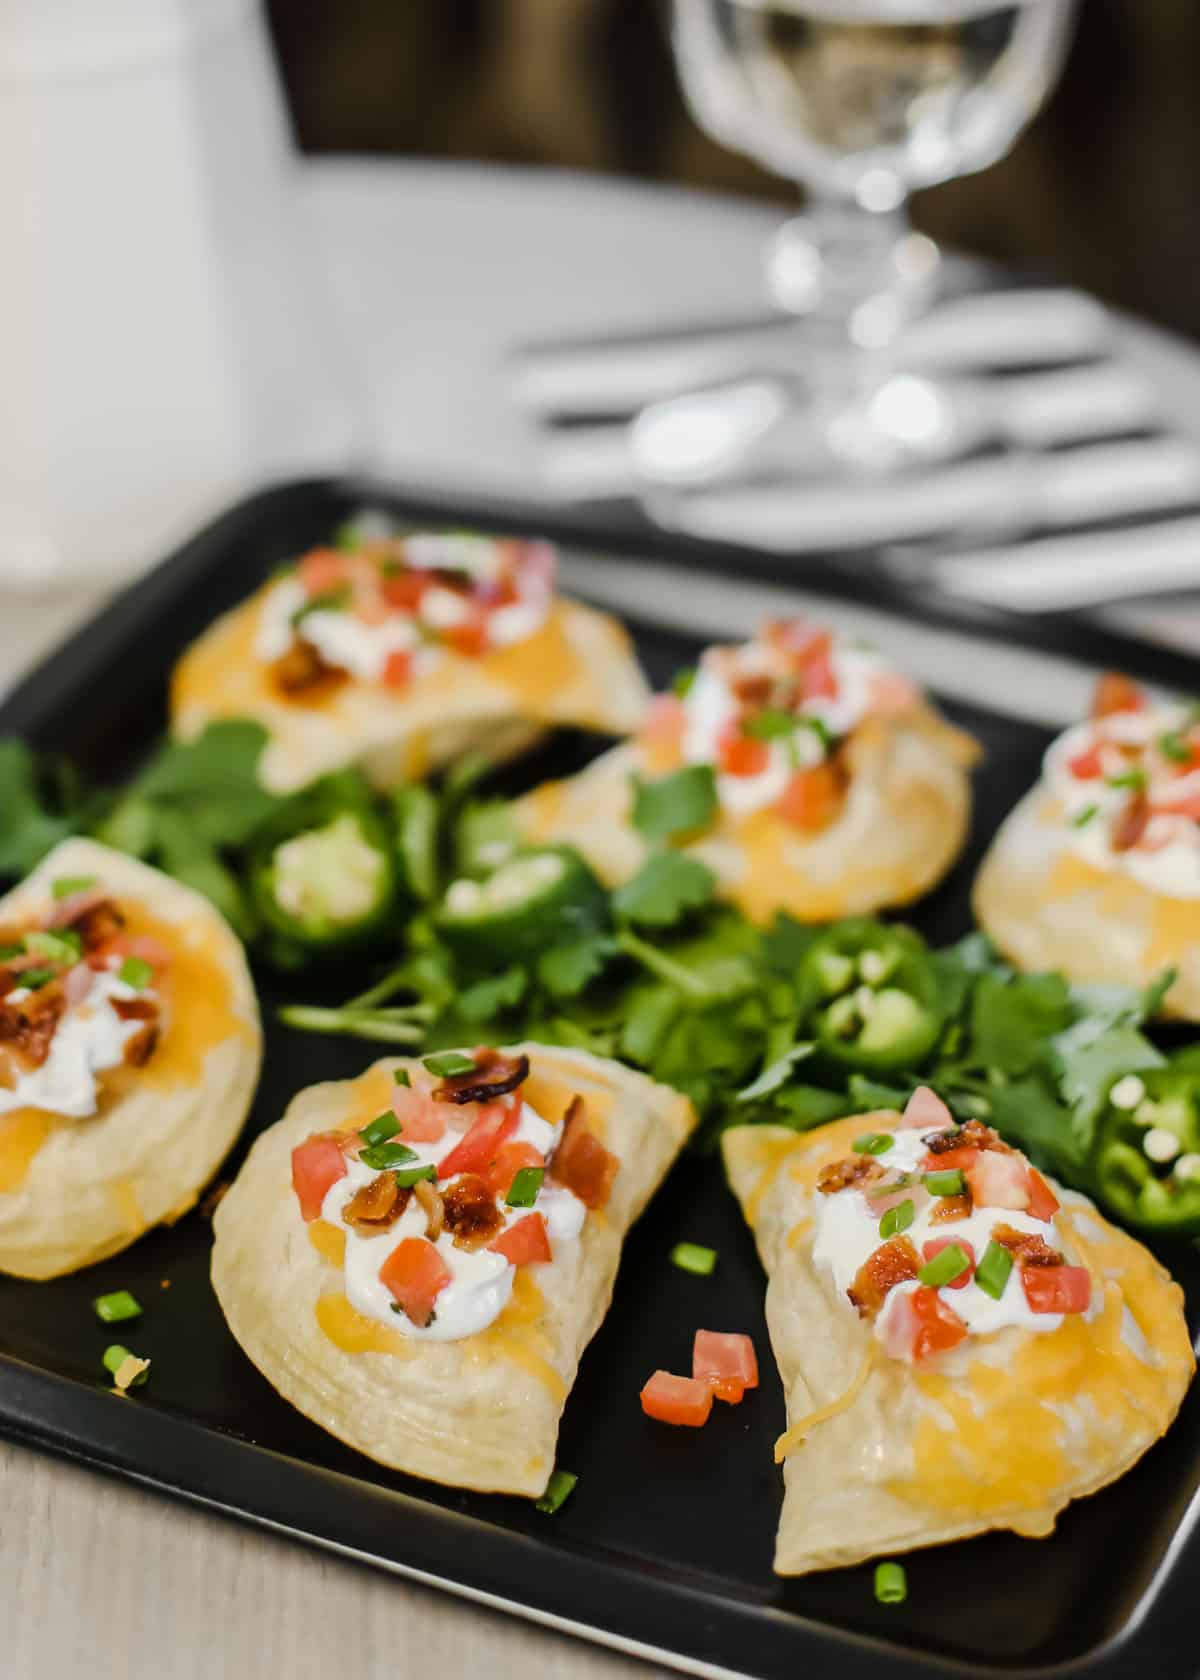 mini pierogis topped with sour cream, tomatoes, bacon and served on black plate.